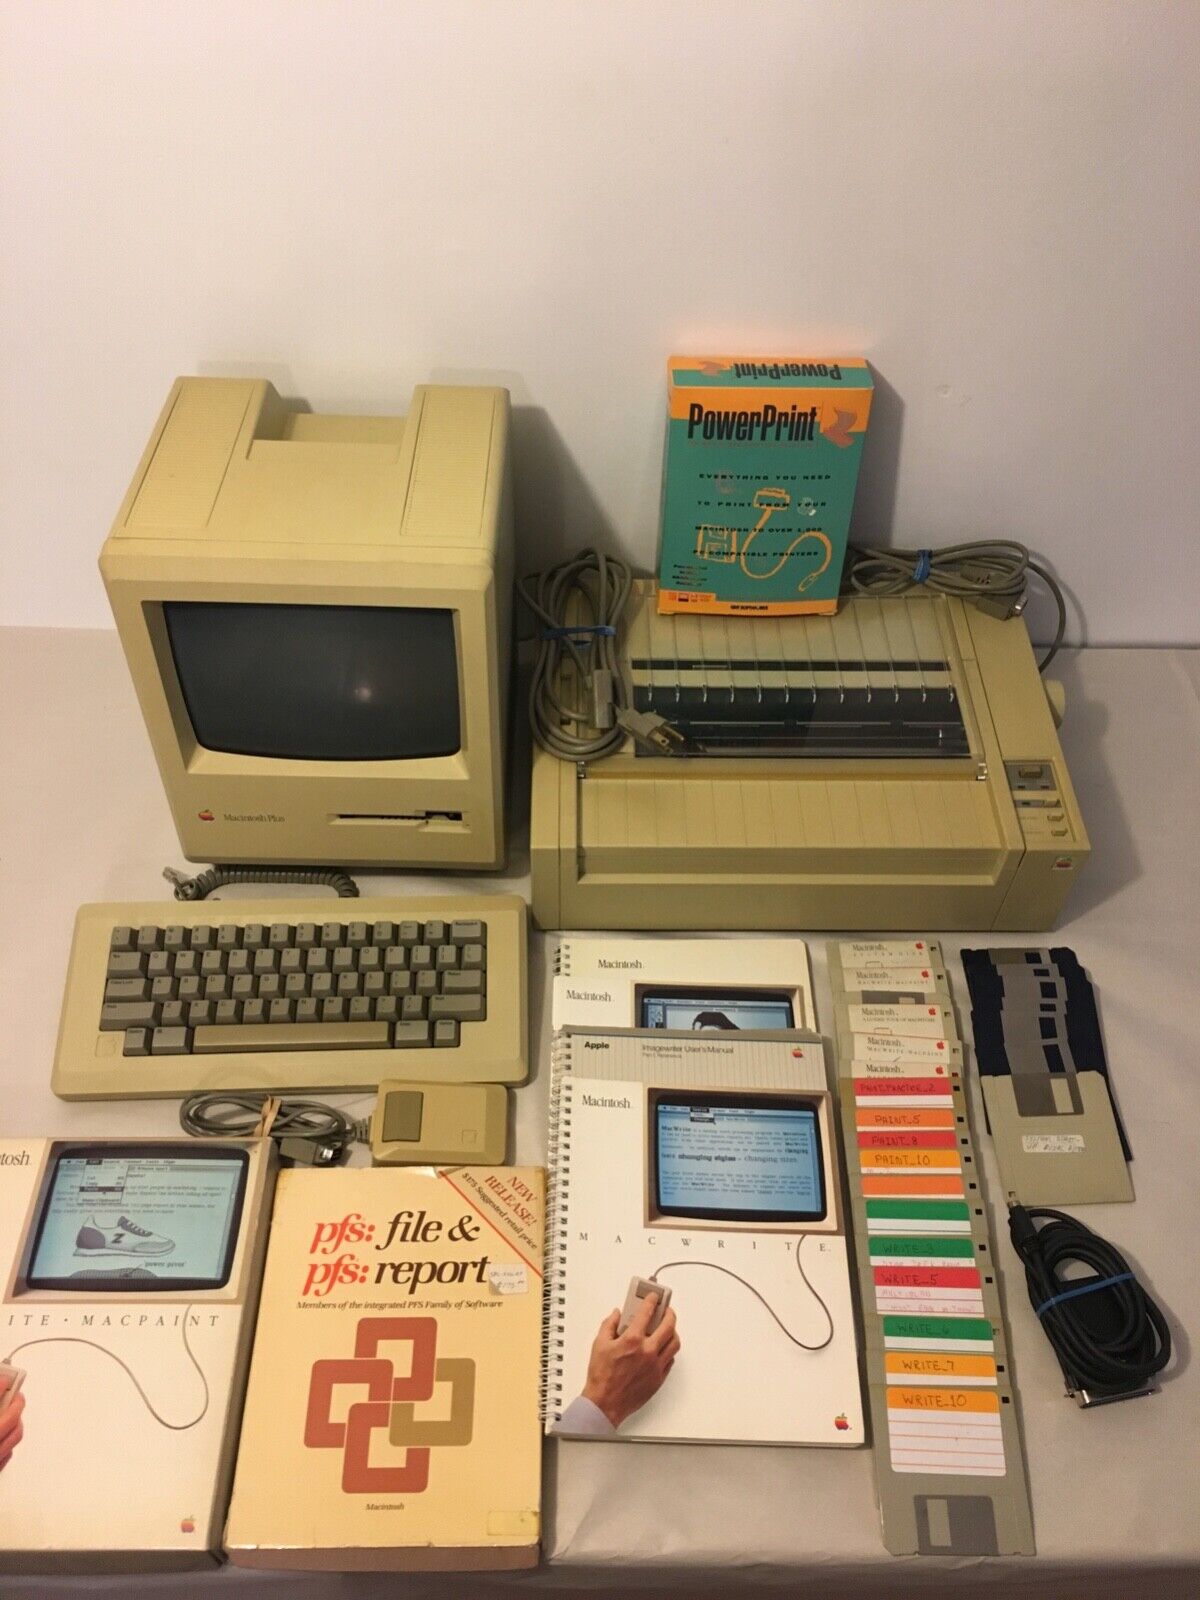 Macintosh Plus 1MB with Mouse, Hard Disk 20, Image Writer, & Floppy Disks